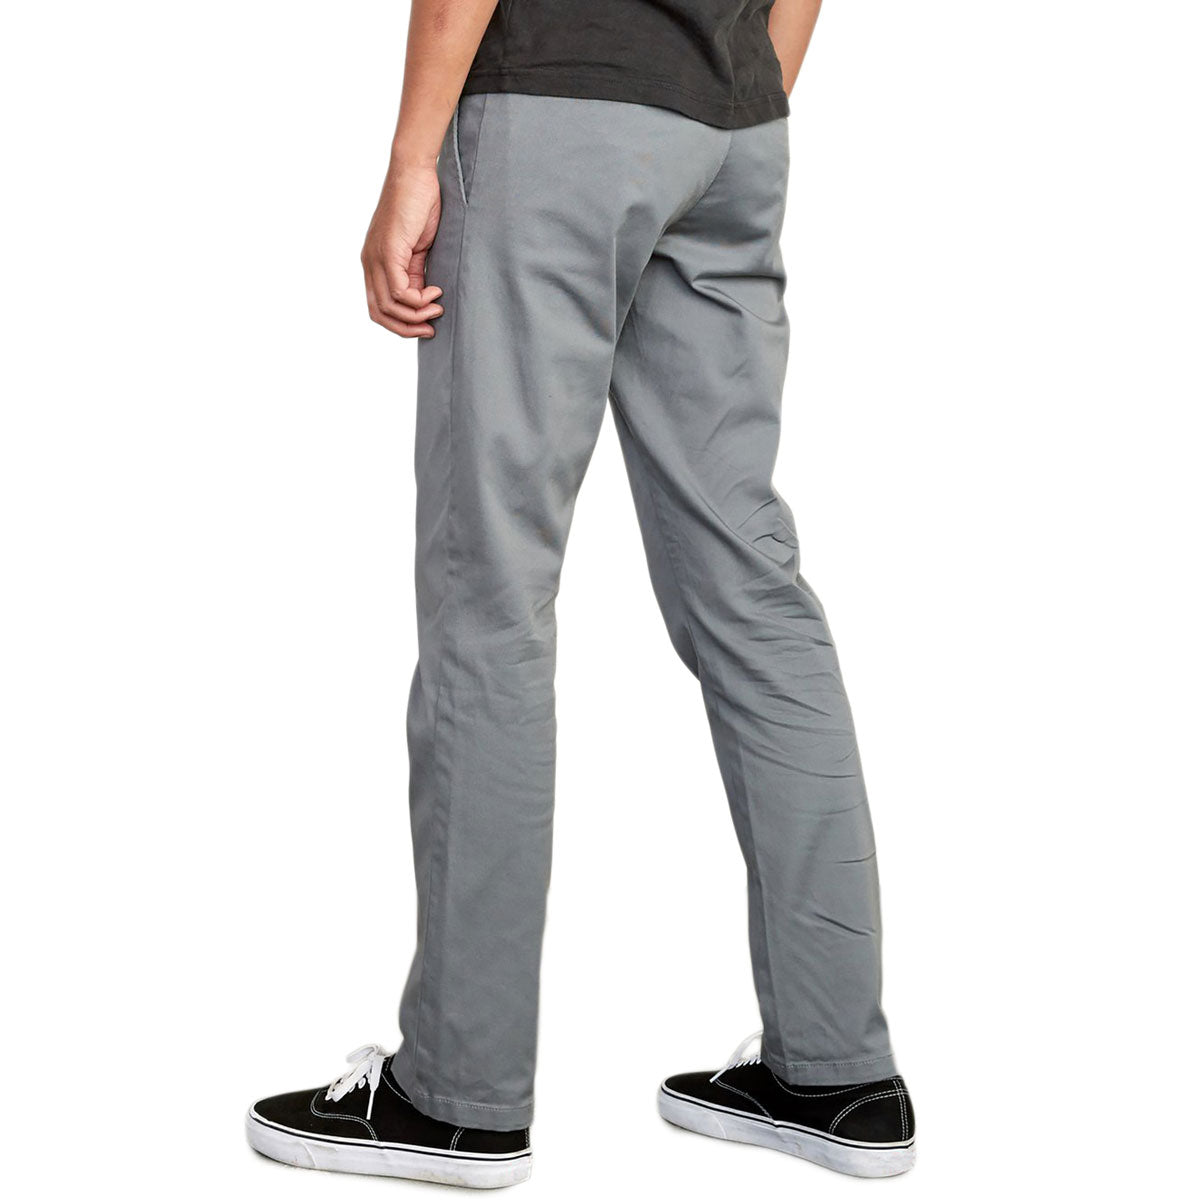 RVCA Weekend Stretch Pants - Smoked image 3